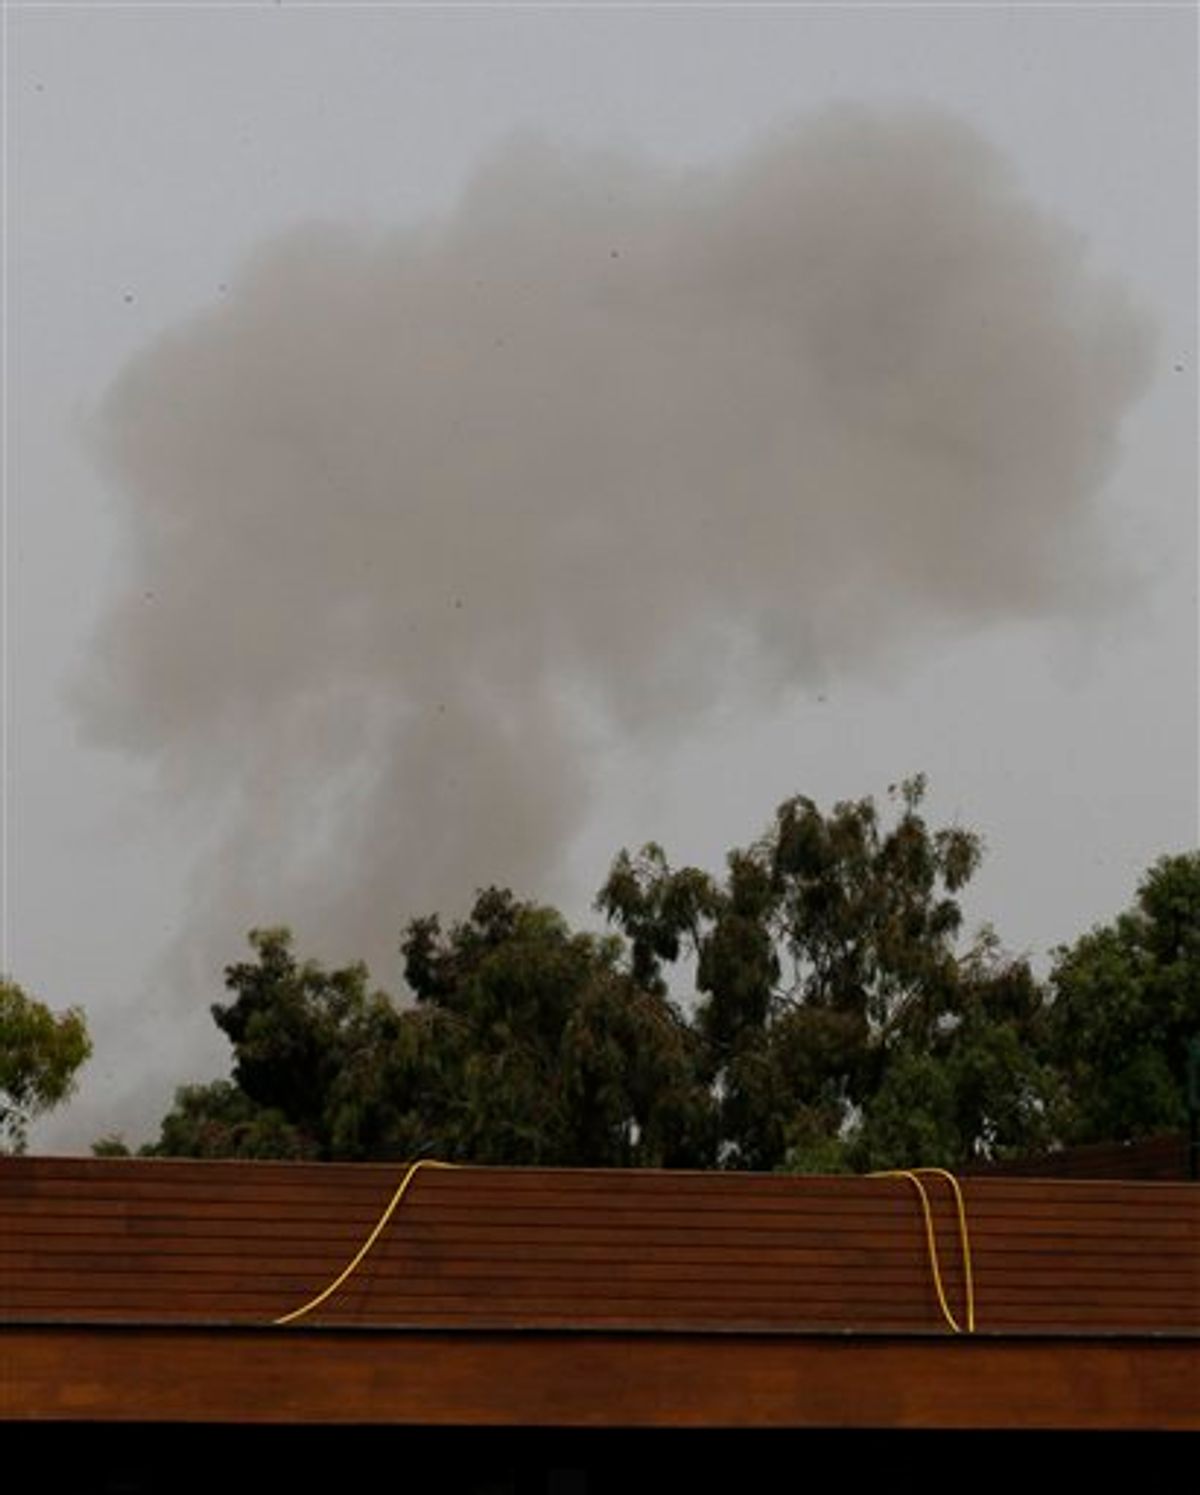 A smoke plume rises into the sky over Tripoli, Libya, on Tuesday, June 7, 2011 following an airstrike. Low-flying NATO military craft have struck seven times in loud, banging succession over the Libyan capital Tripoli. The strikes occurred Tuesday morning, marking an increase in NATO pressure on the regime of Moammar Gadhafi. (AP Photo/Ivan Sekretarev) (AP)